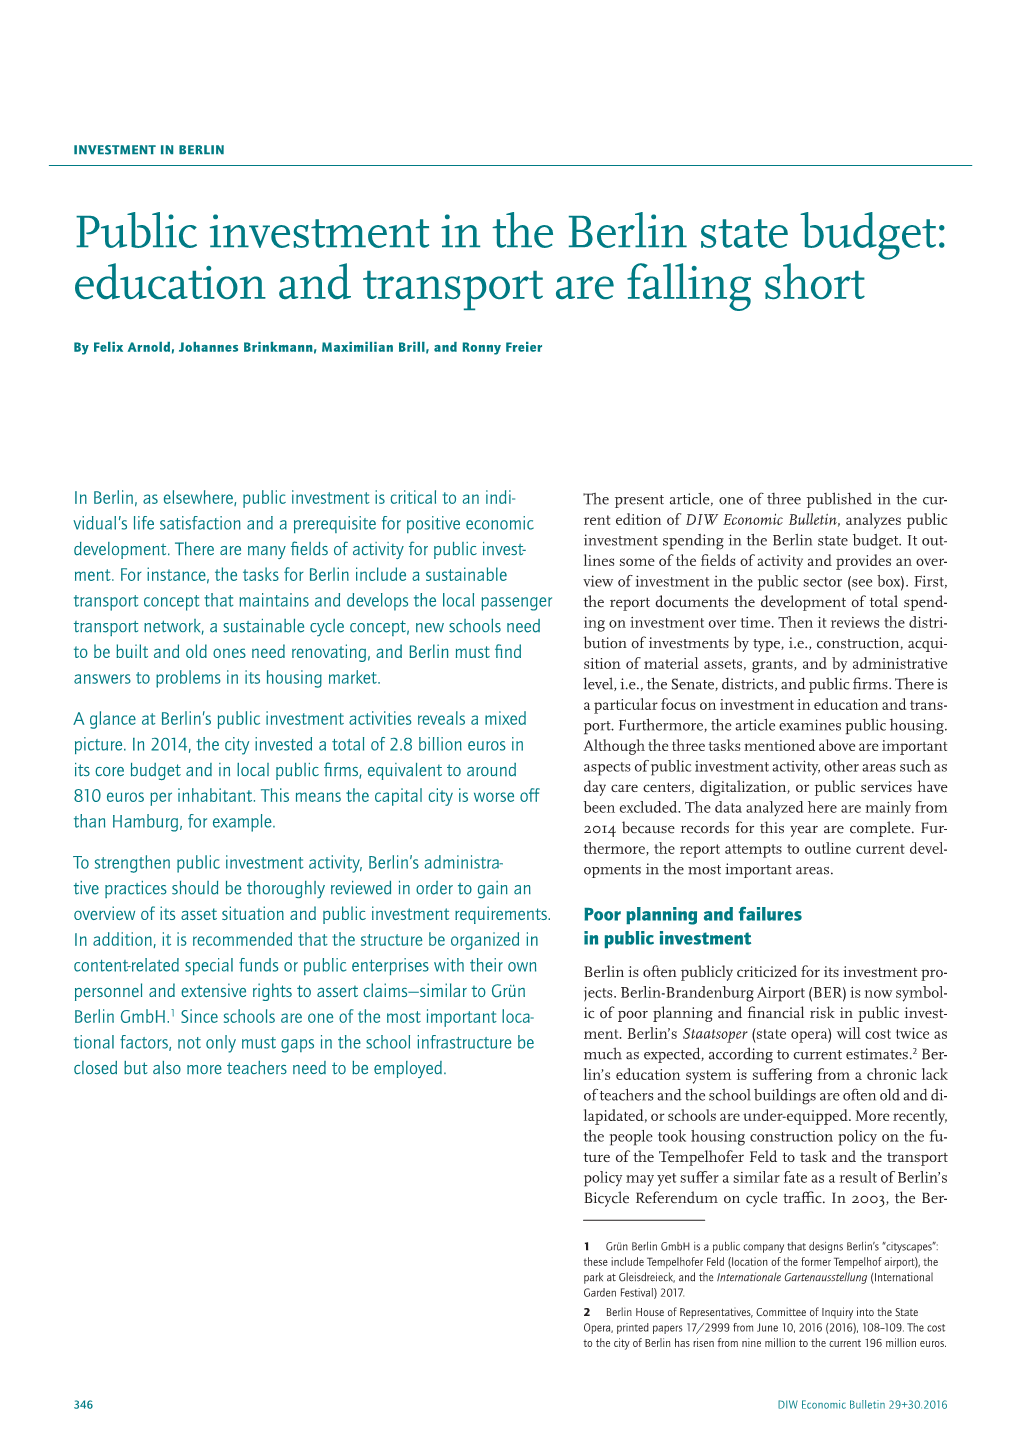 Public Investment in the Berlin State Budget: Education and Transport Are Falling Short